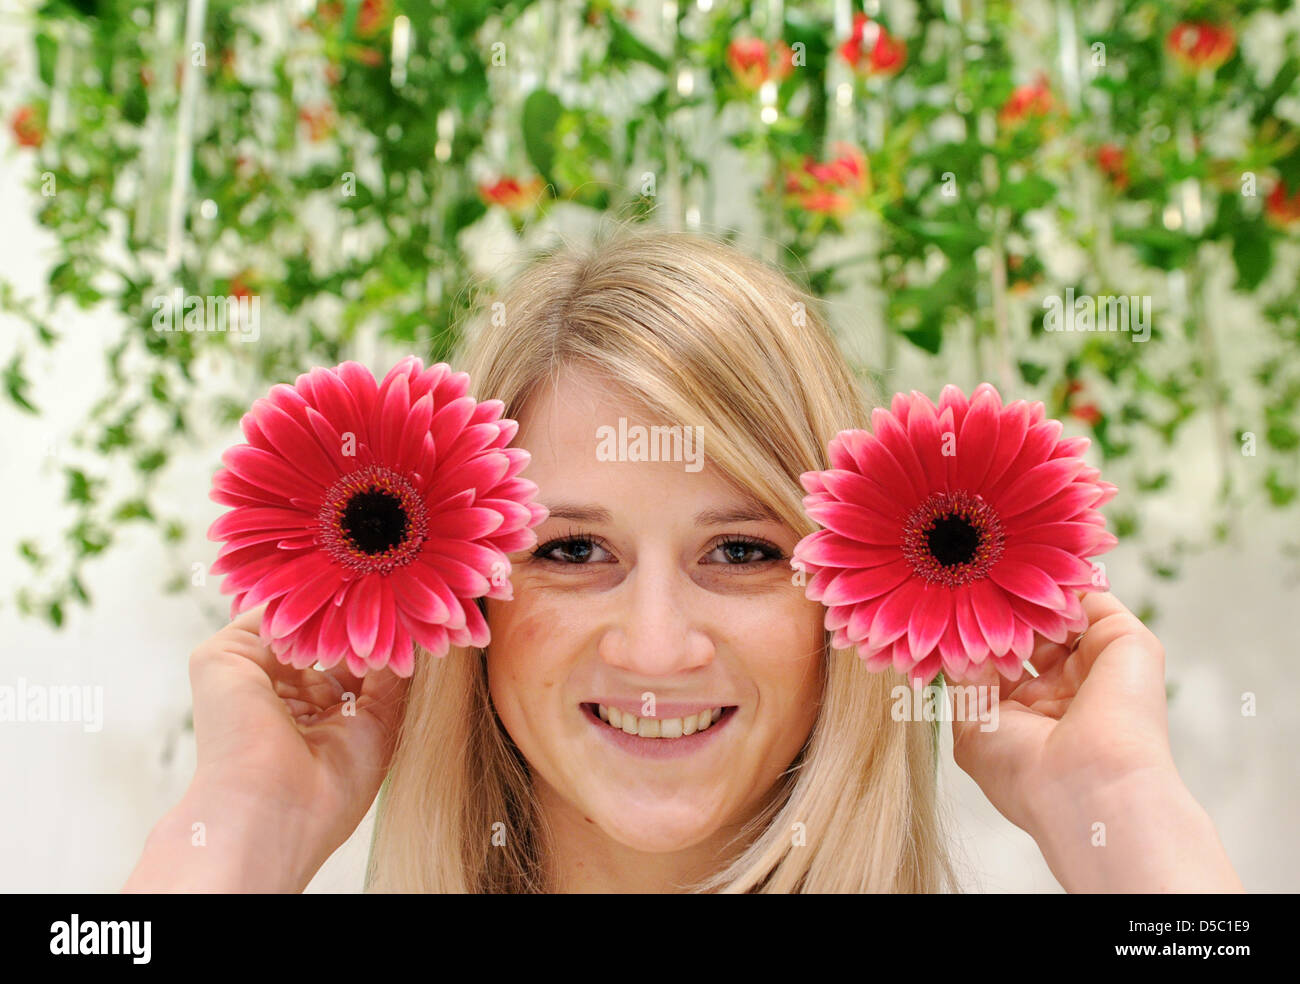 Model Anna poses with two red gerberas during a photo call promoting the international botanical and gardening fair IPM in Essen, Germany, 25 January 2010. IPM is a fair for professional visitors only and opens from 26 January to 29 January 2010. Some 1.500 exhibitors from 43 nations present their latest products in floristics, gardening and botanics. According to the organisers IP Stock Photo